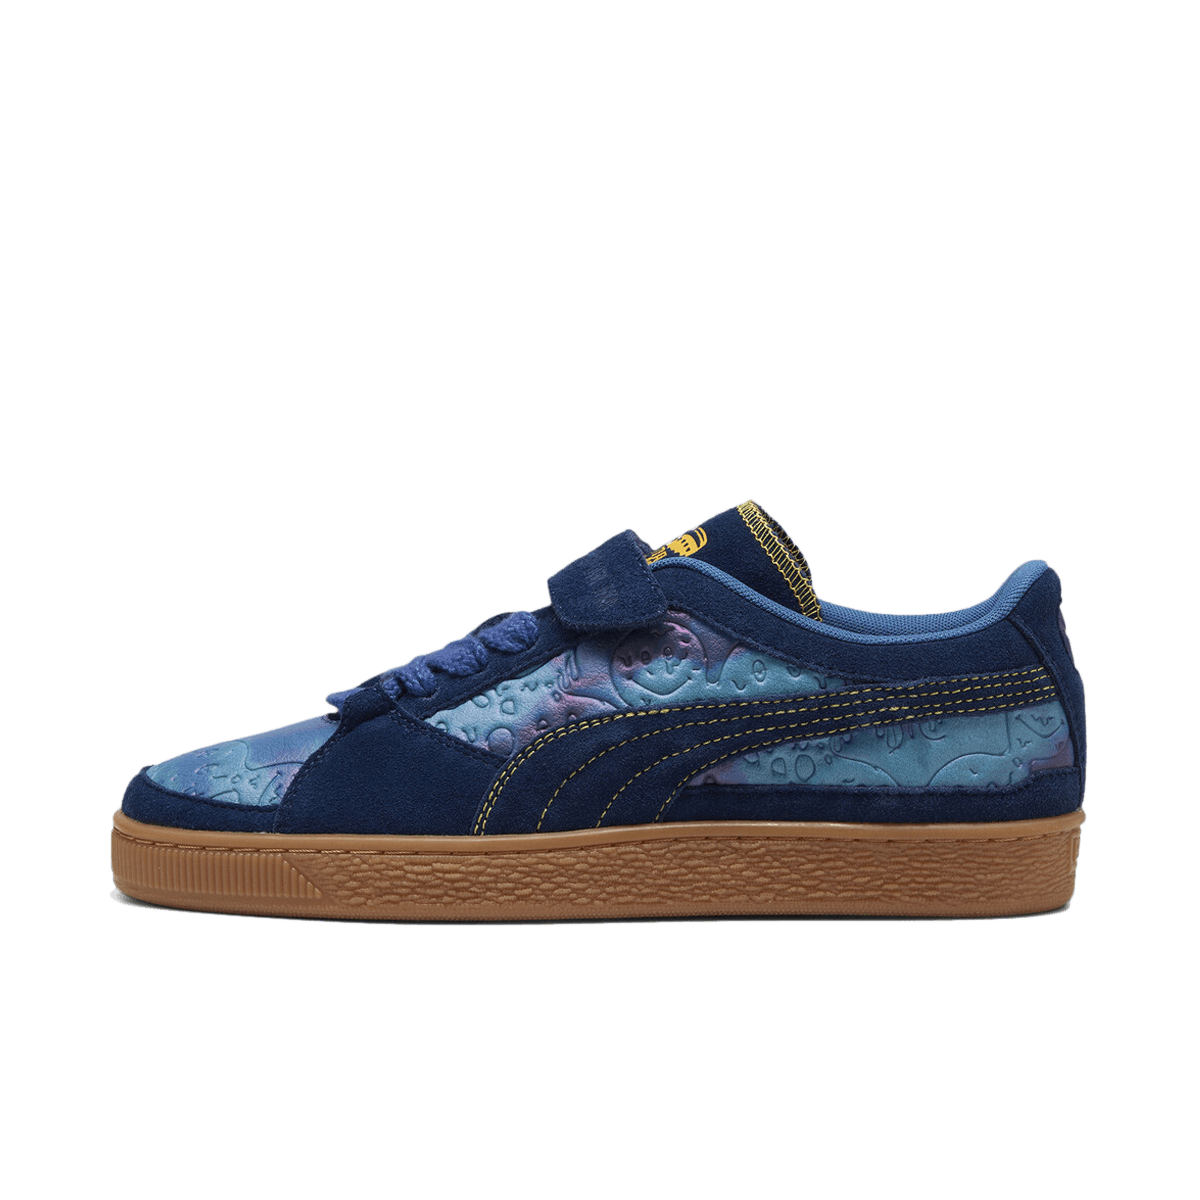 Dazed and Confused x Puma Suede 'Persian Blue' 397322-01